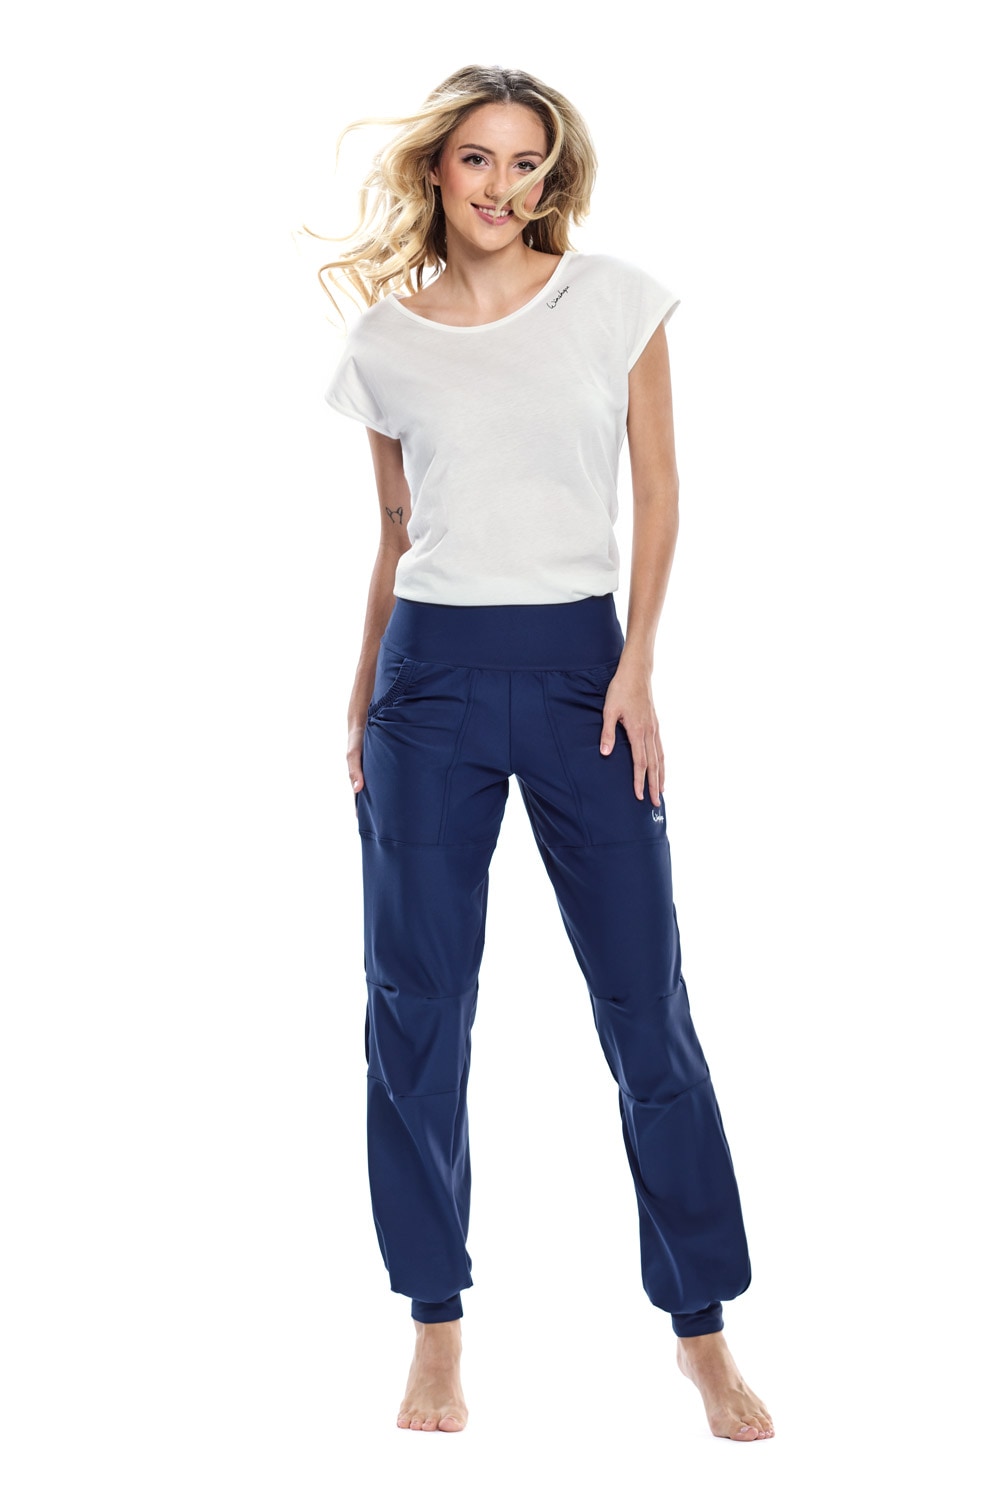 Winshape Trousers Sporthose Time LEI101C«, Comfort Waist »Functional online bei Leisure High OTTO